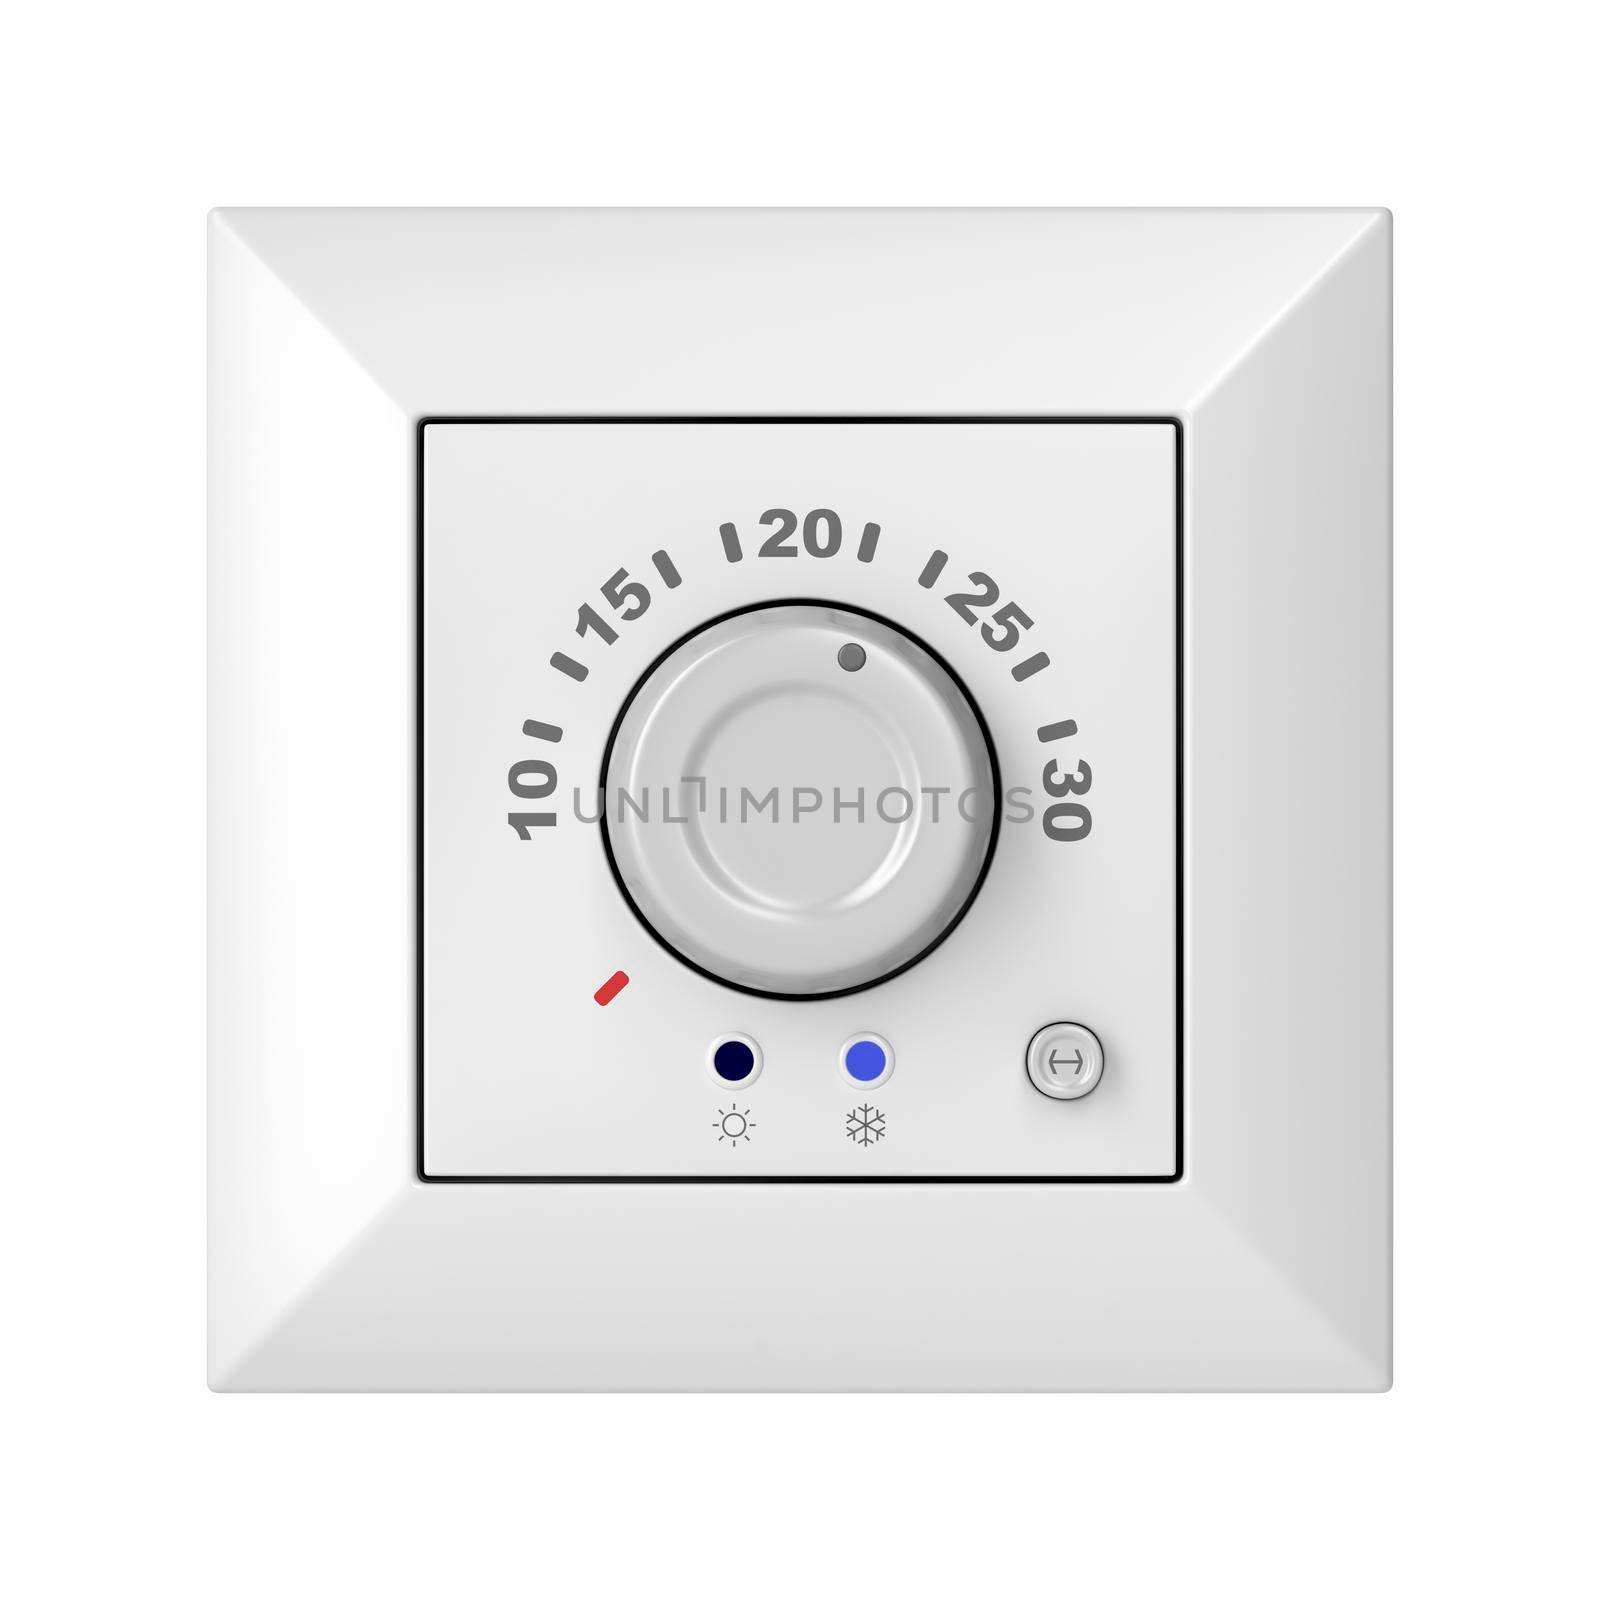 Air conditioner control panel by magraphics